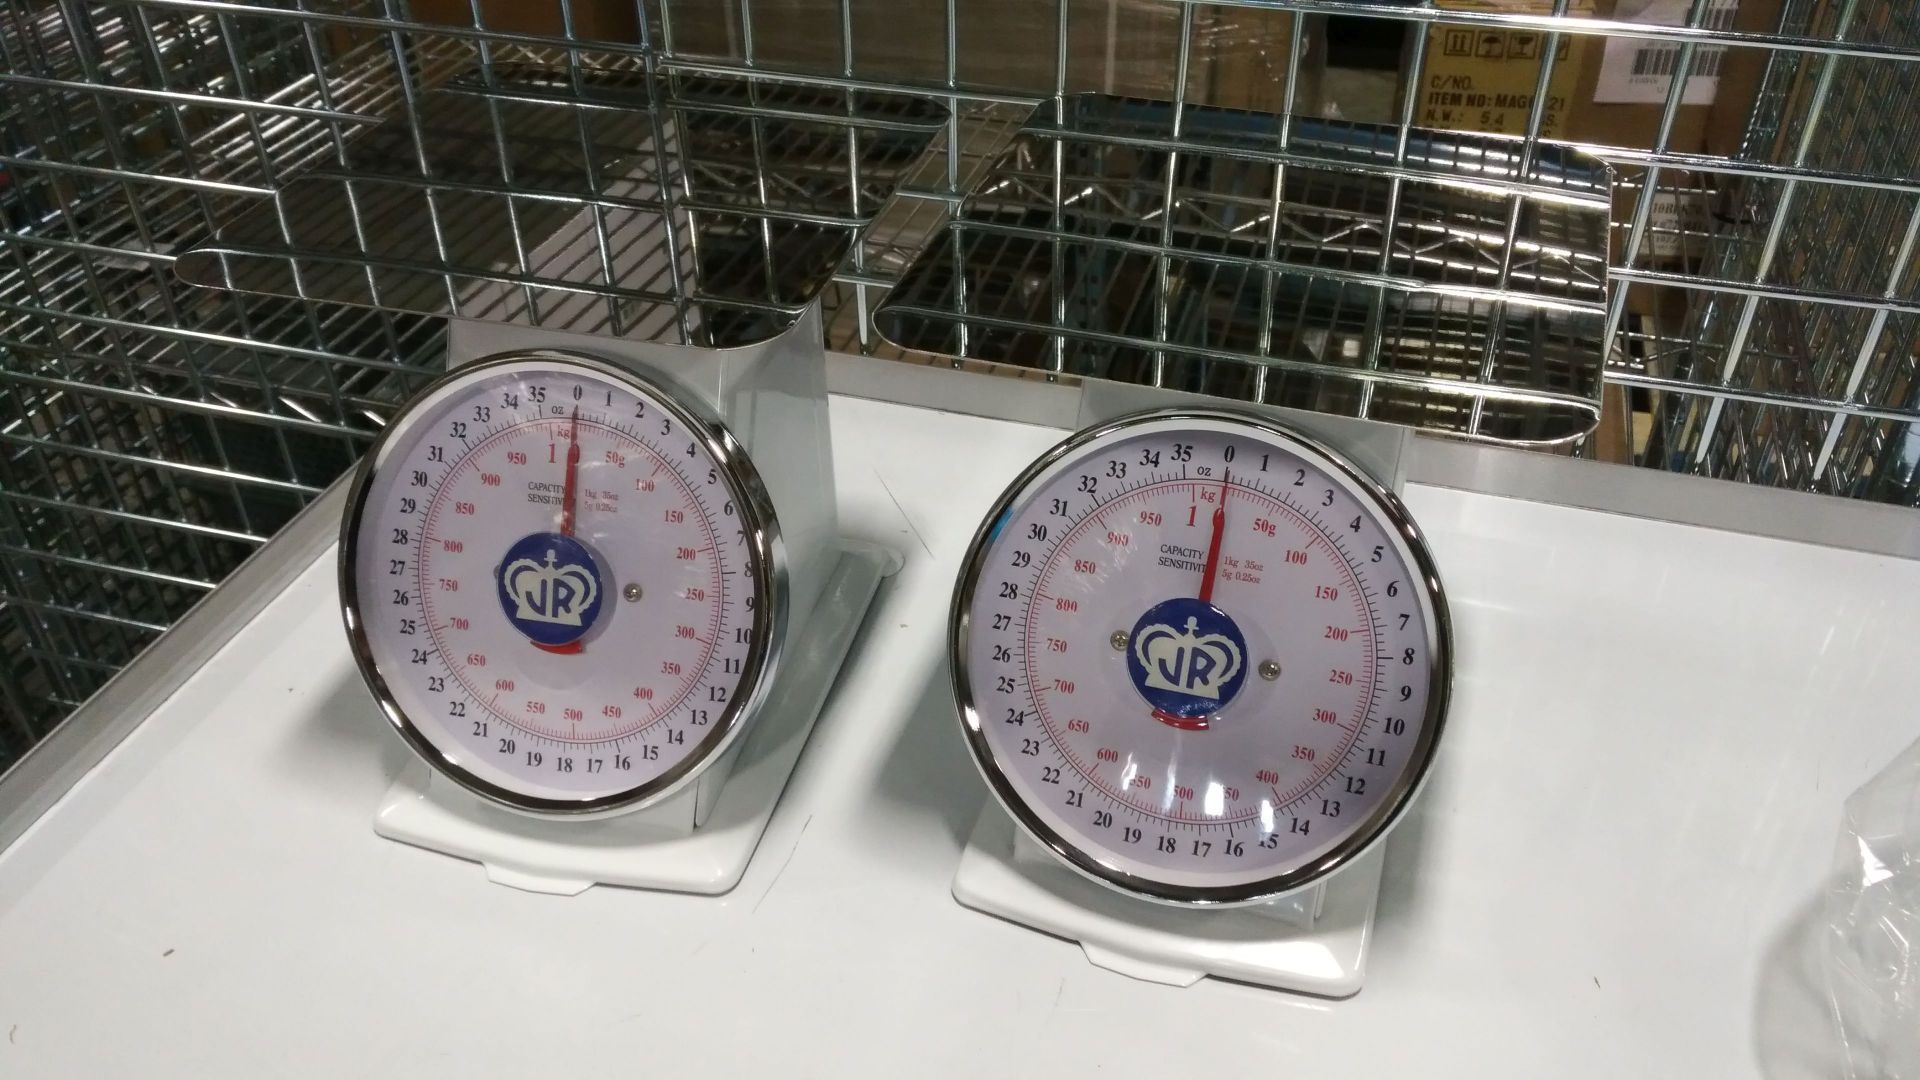 1kg/35oz Dial Scales - Lot of 2 - Image 3 of 6